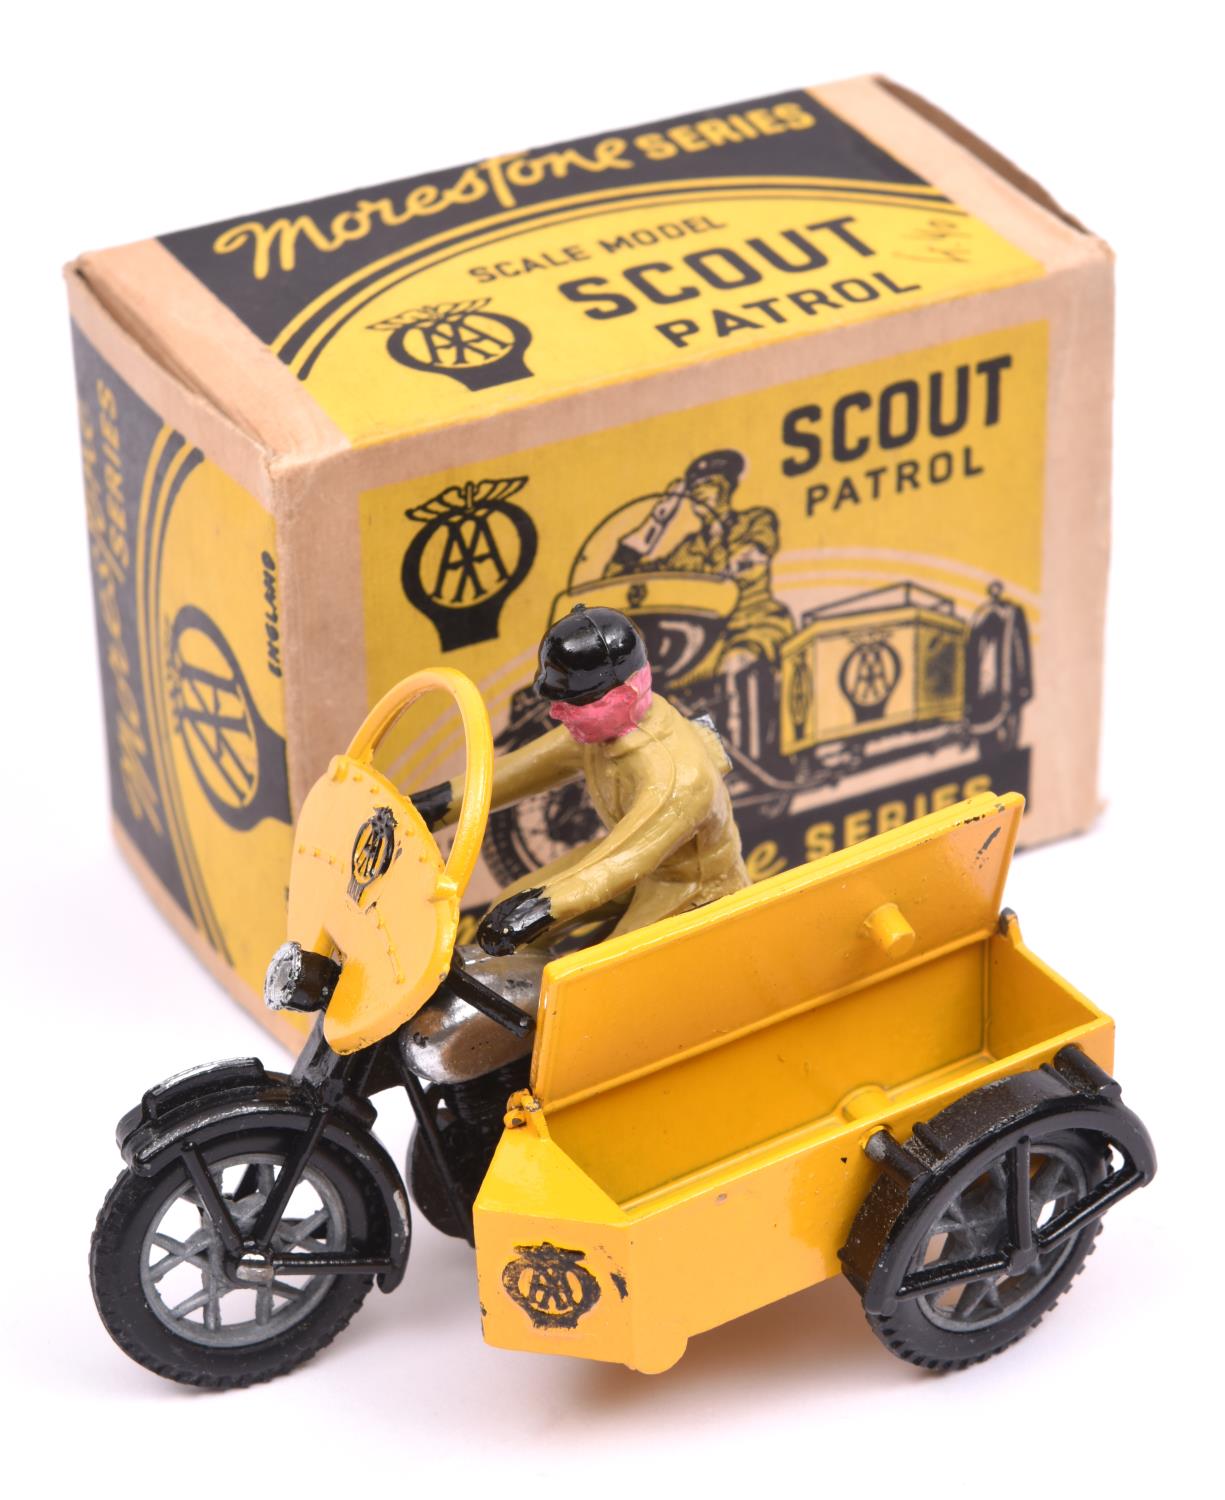 Morestone Series AA Scout Patrol. In black and yellow livery, with silver tank and detachable